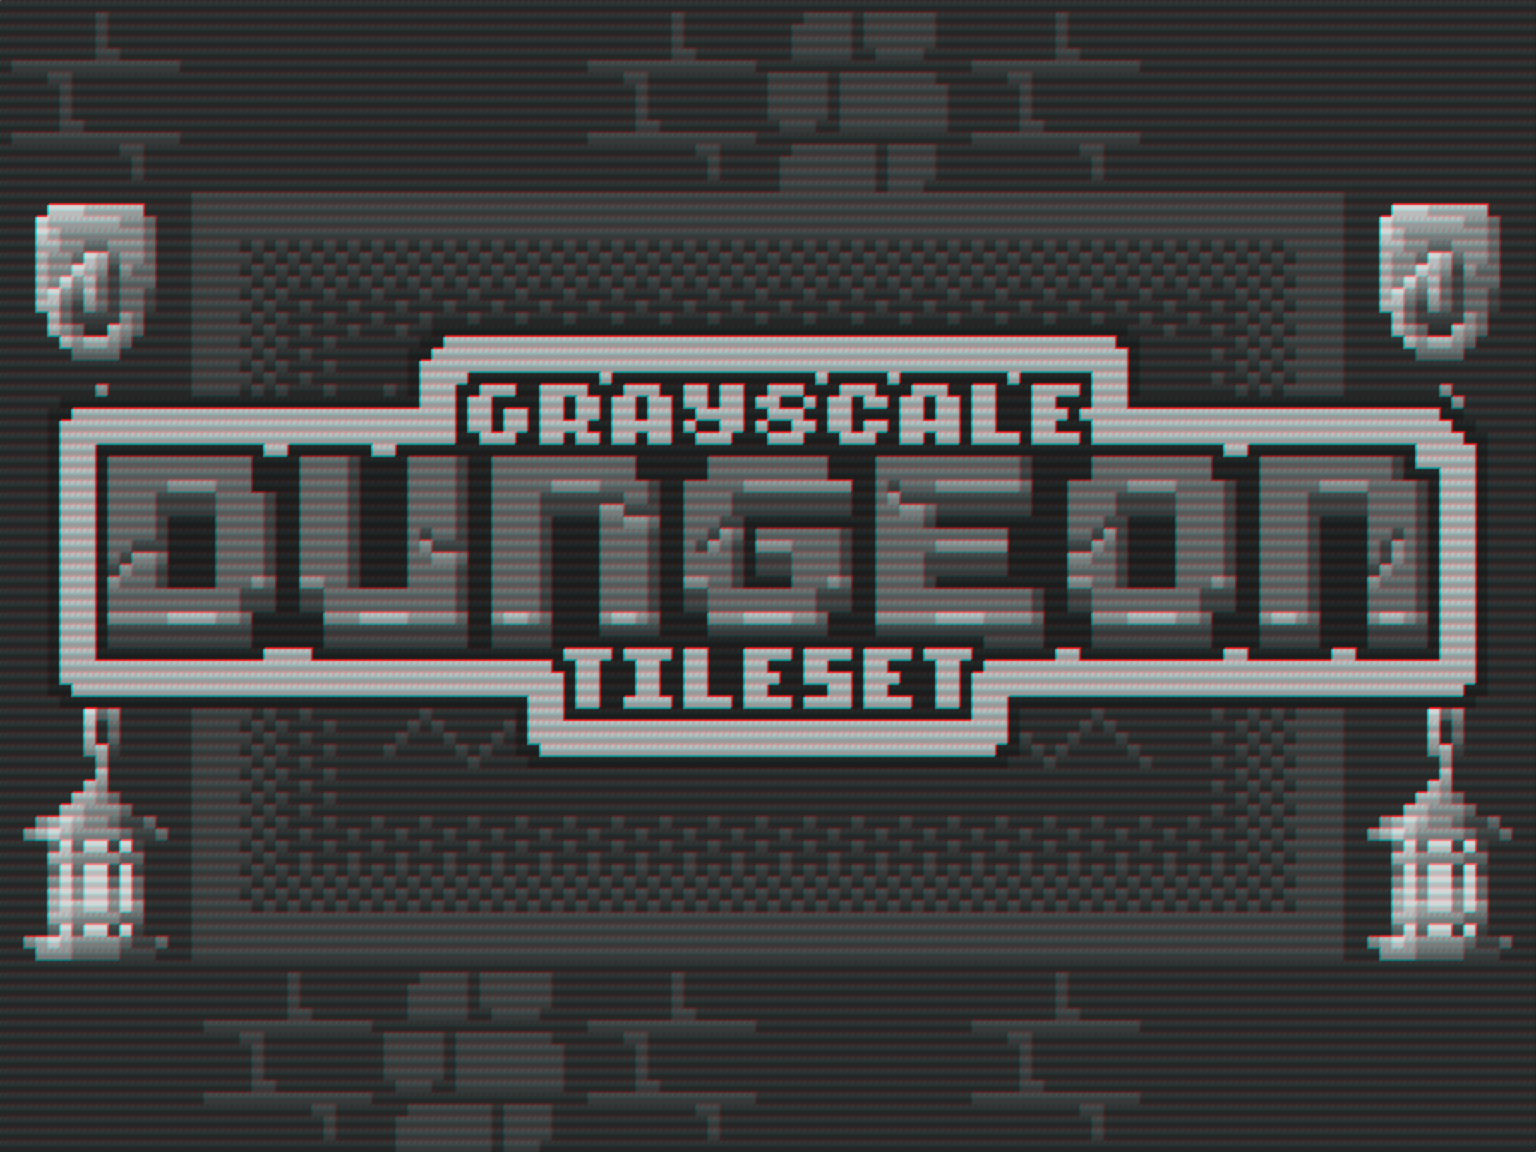 [16x16] Grayscale DUNGEON Tileset